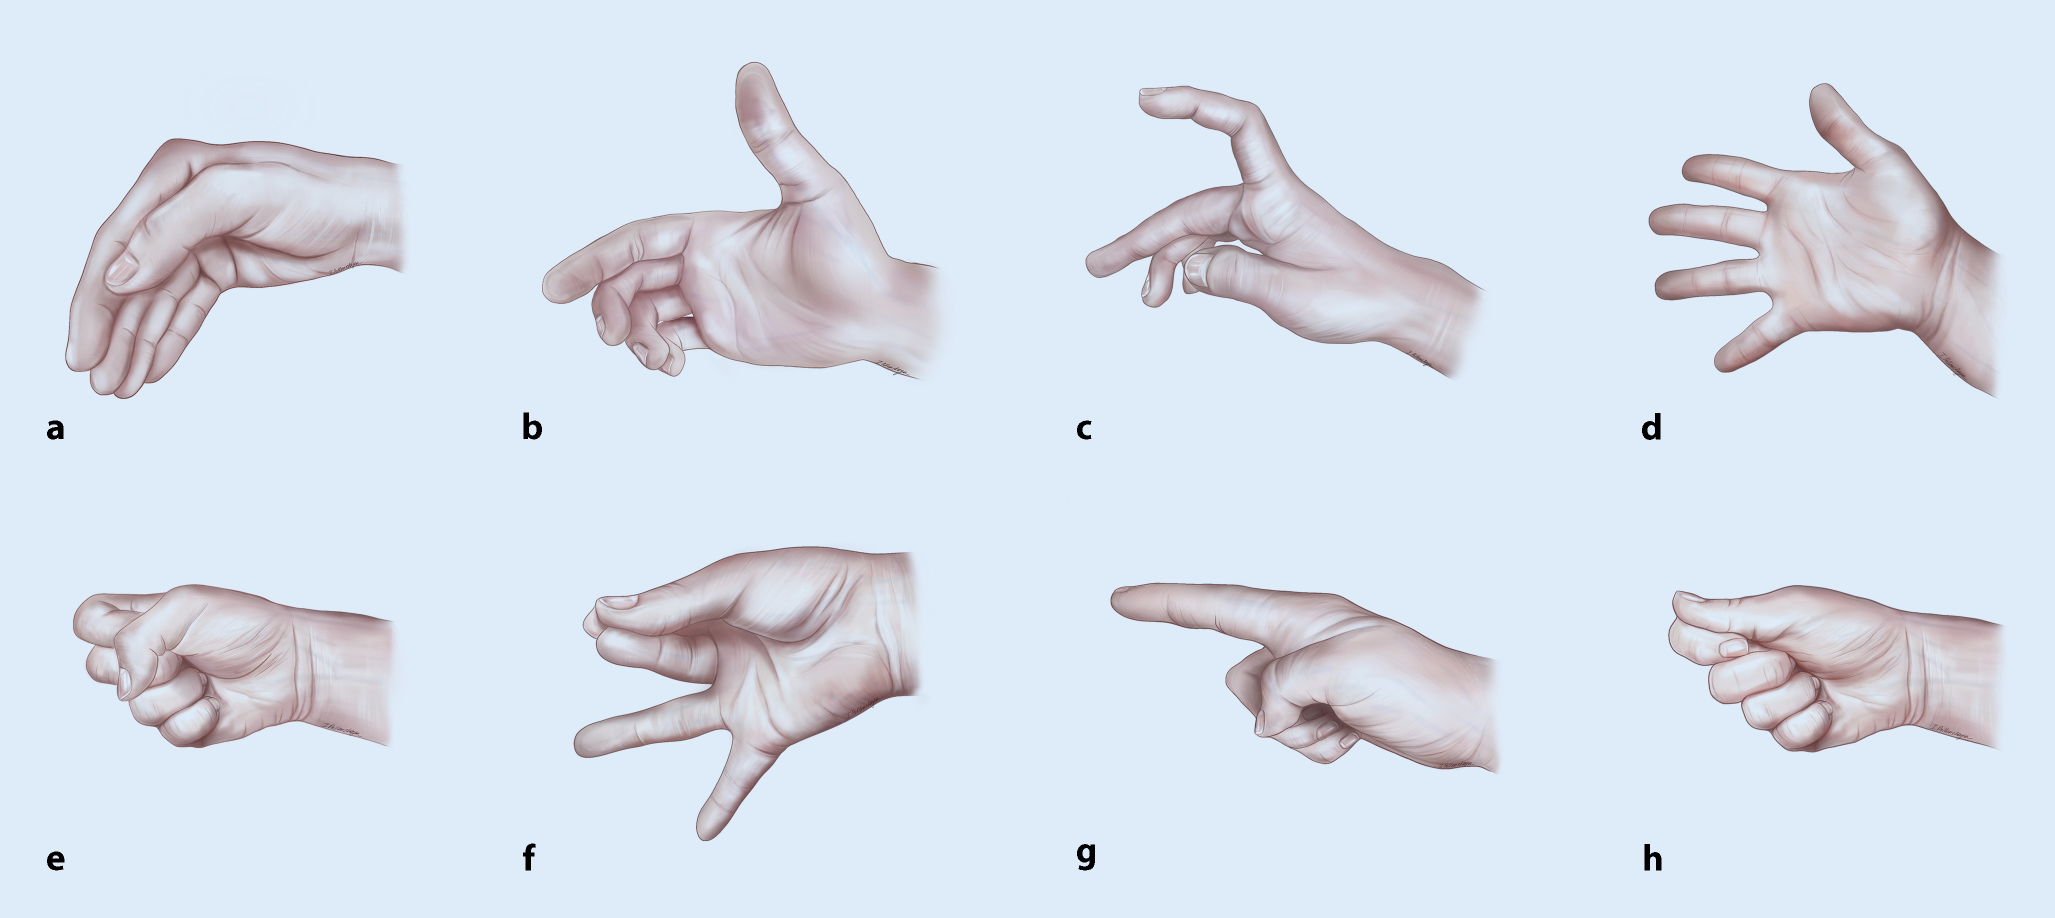 Ictal hand signs: Minimal previous attention to these diagnostic indicators